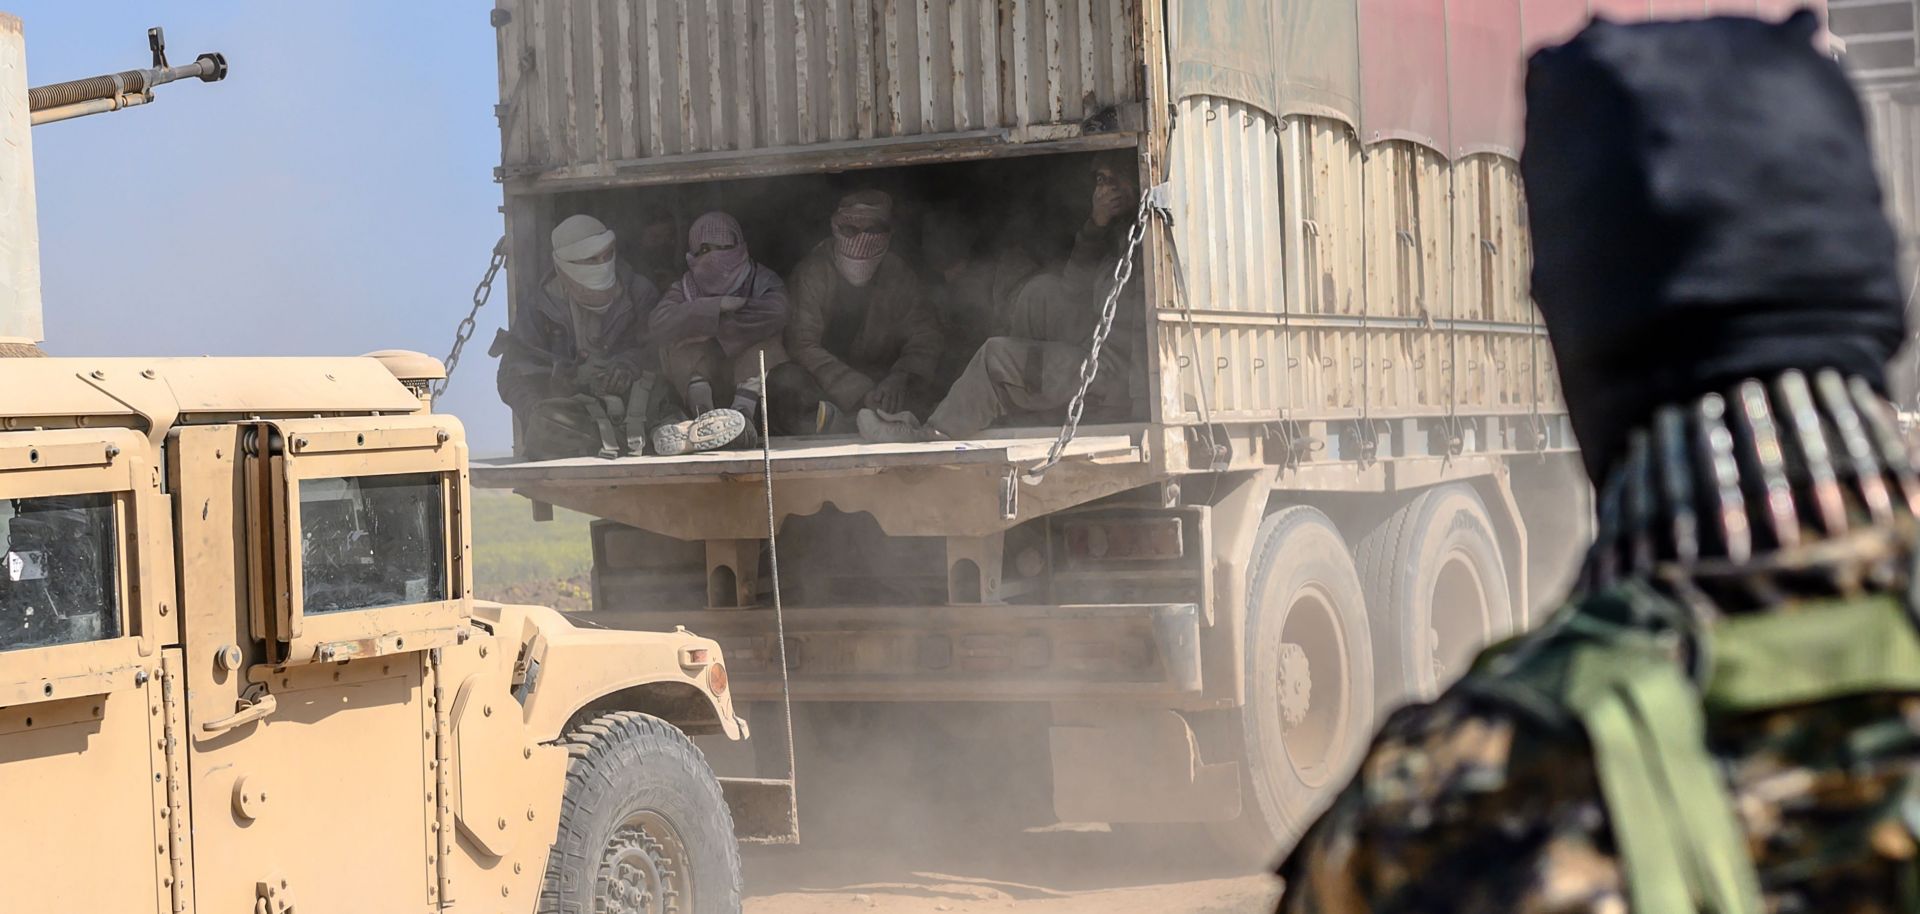 A truck carries men identified as Islamic State fighters on Feb. 20, 2019, near Baghouz, Syria. The fighters surrendered to Kurdish-led Syrian Democratic Forces.